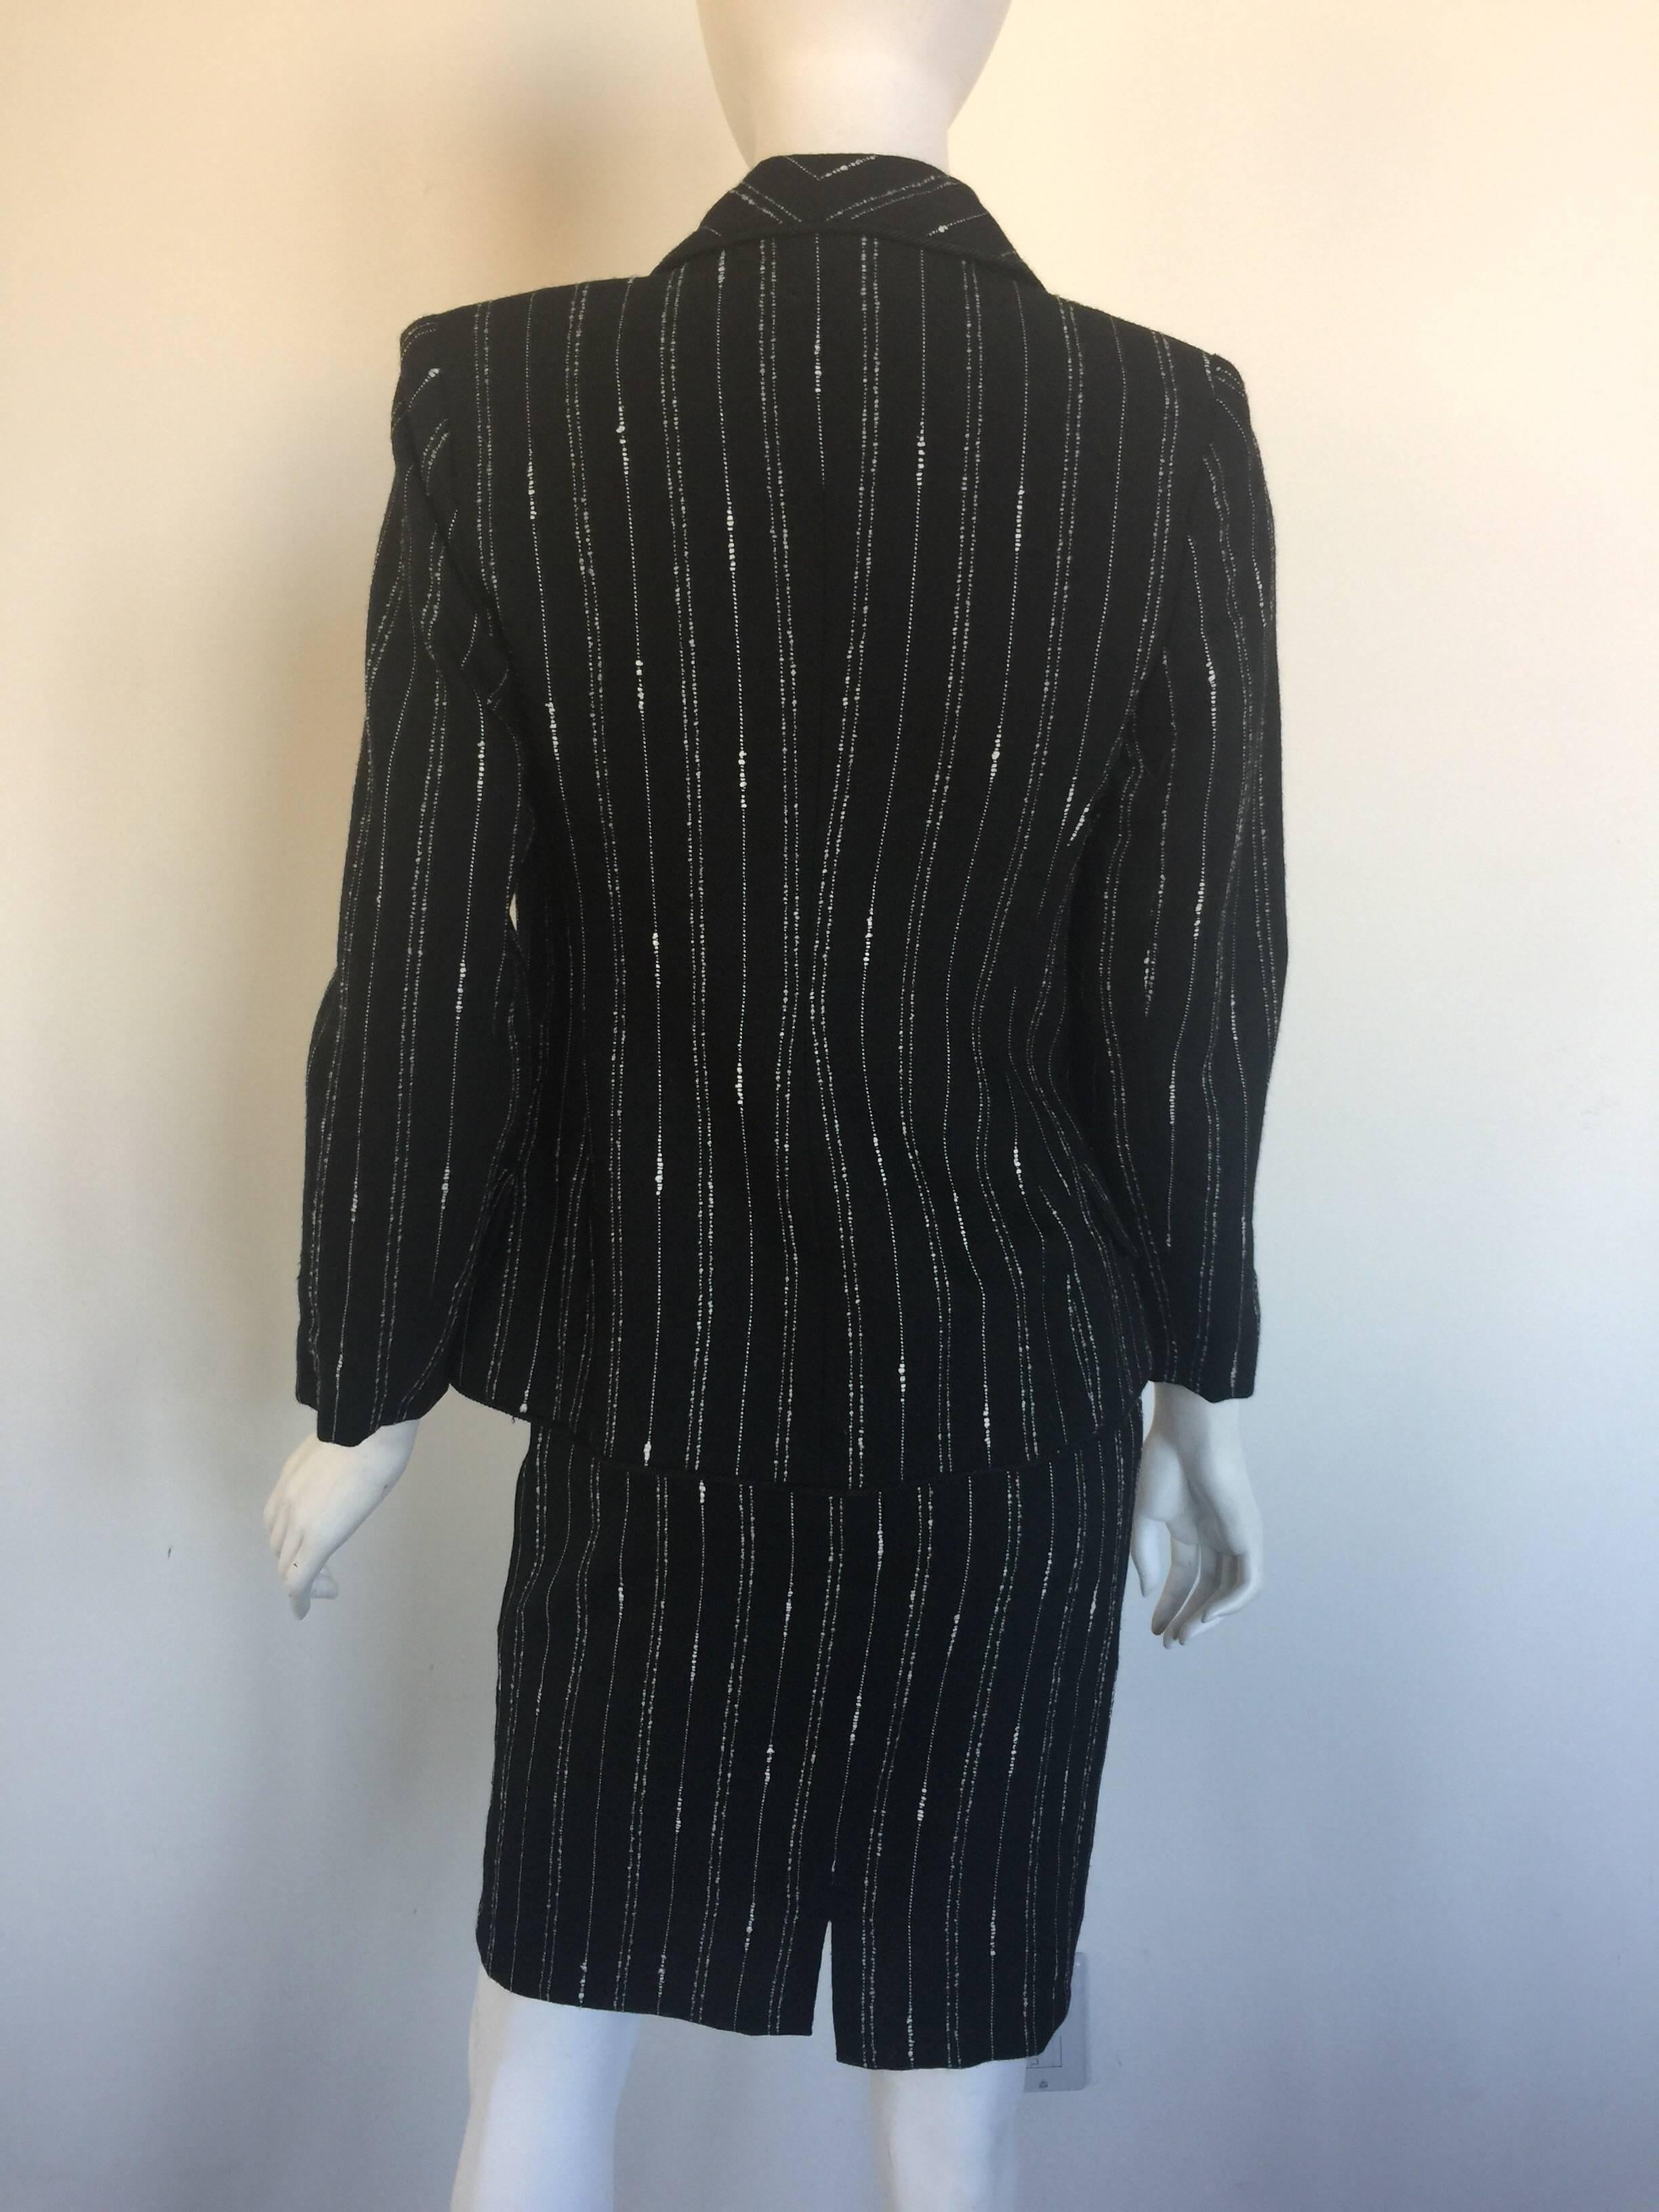 Givenchy black and white pinstripe skirt suit For Sale 2